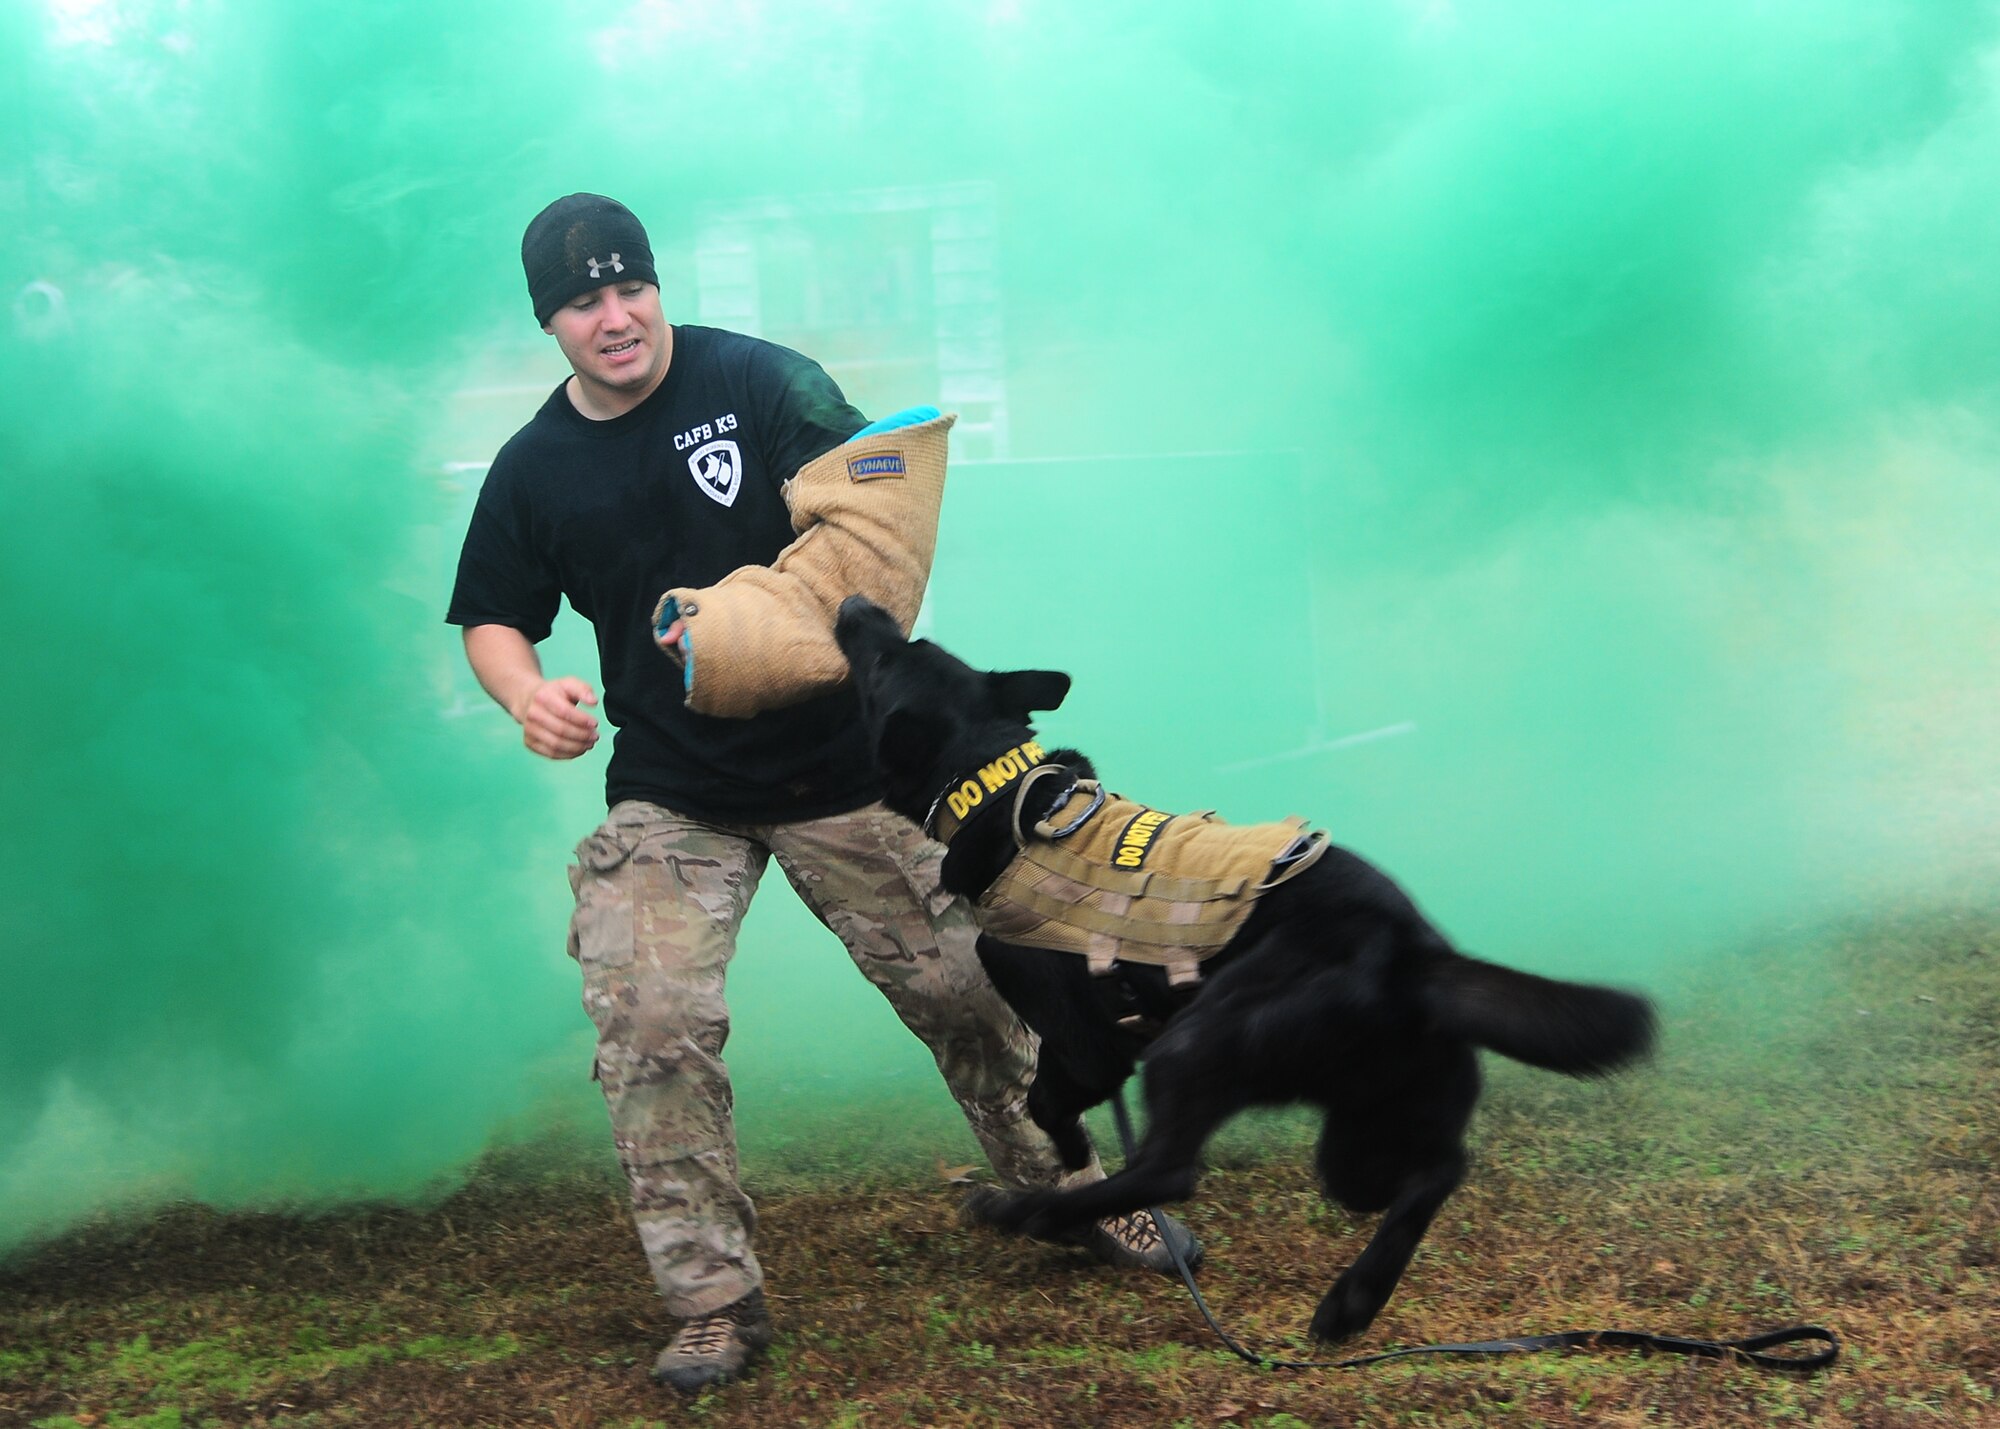 Maci, a military police working dog, attacks her target during a controlled aggression demonstration at the Military Working Dog Demonstration Nov. 22 outside of the Columbus Club. (U.S. Air Force Photo/Airman 1st Class Daniel Lile)